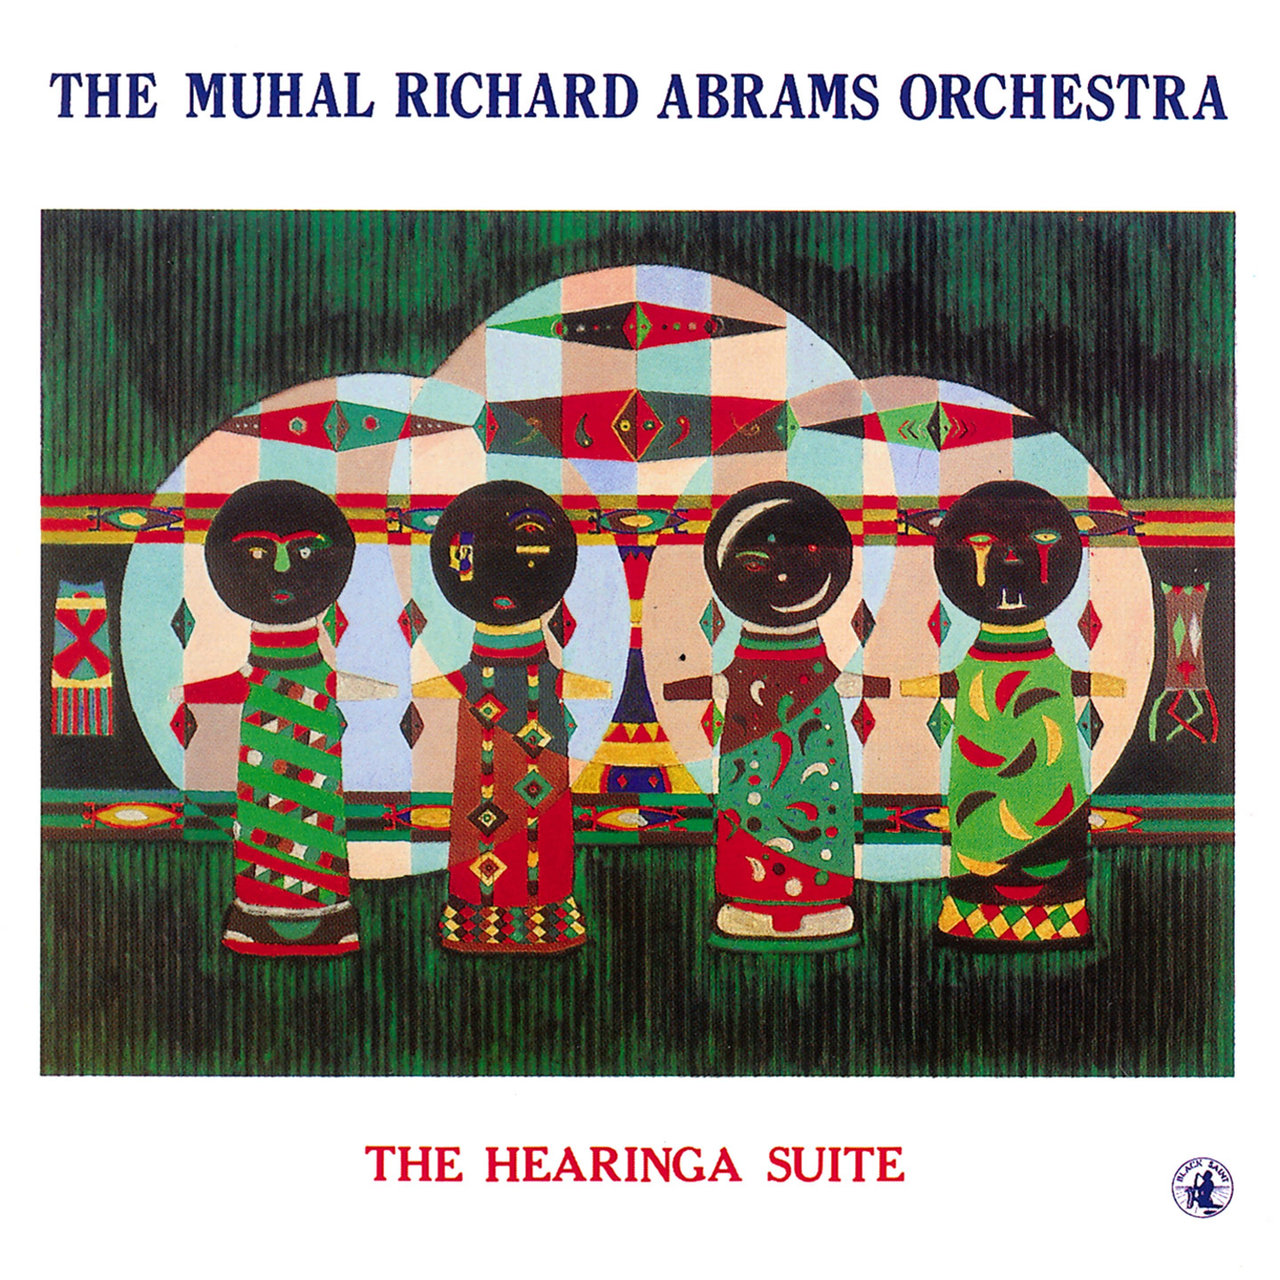 The Muhal Richard Abrams Orchestra 'The Hearinga Suite'